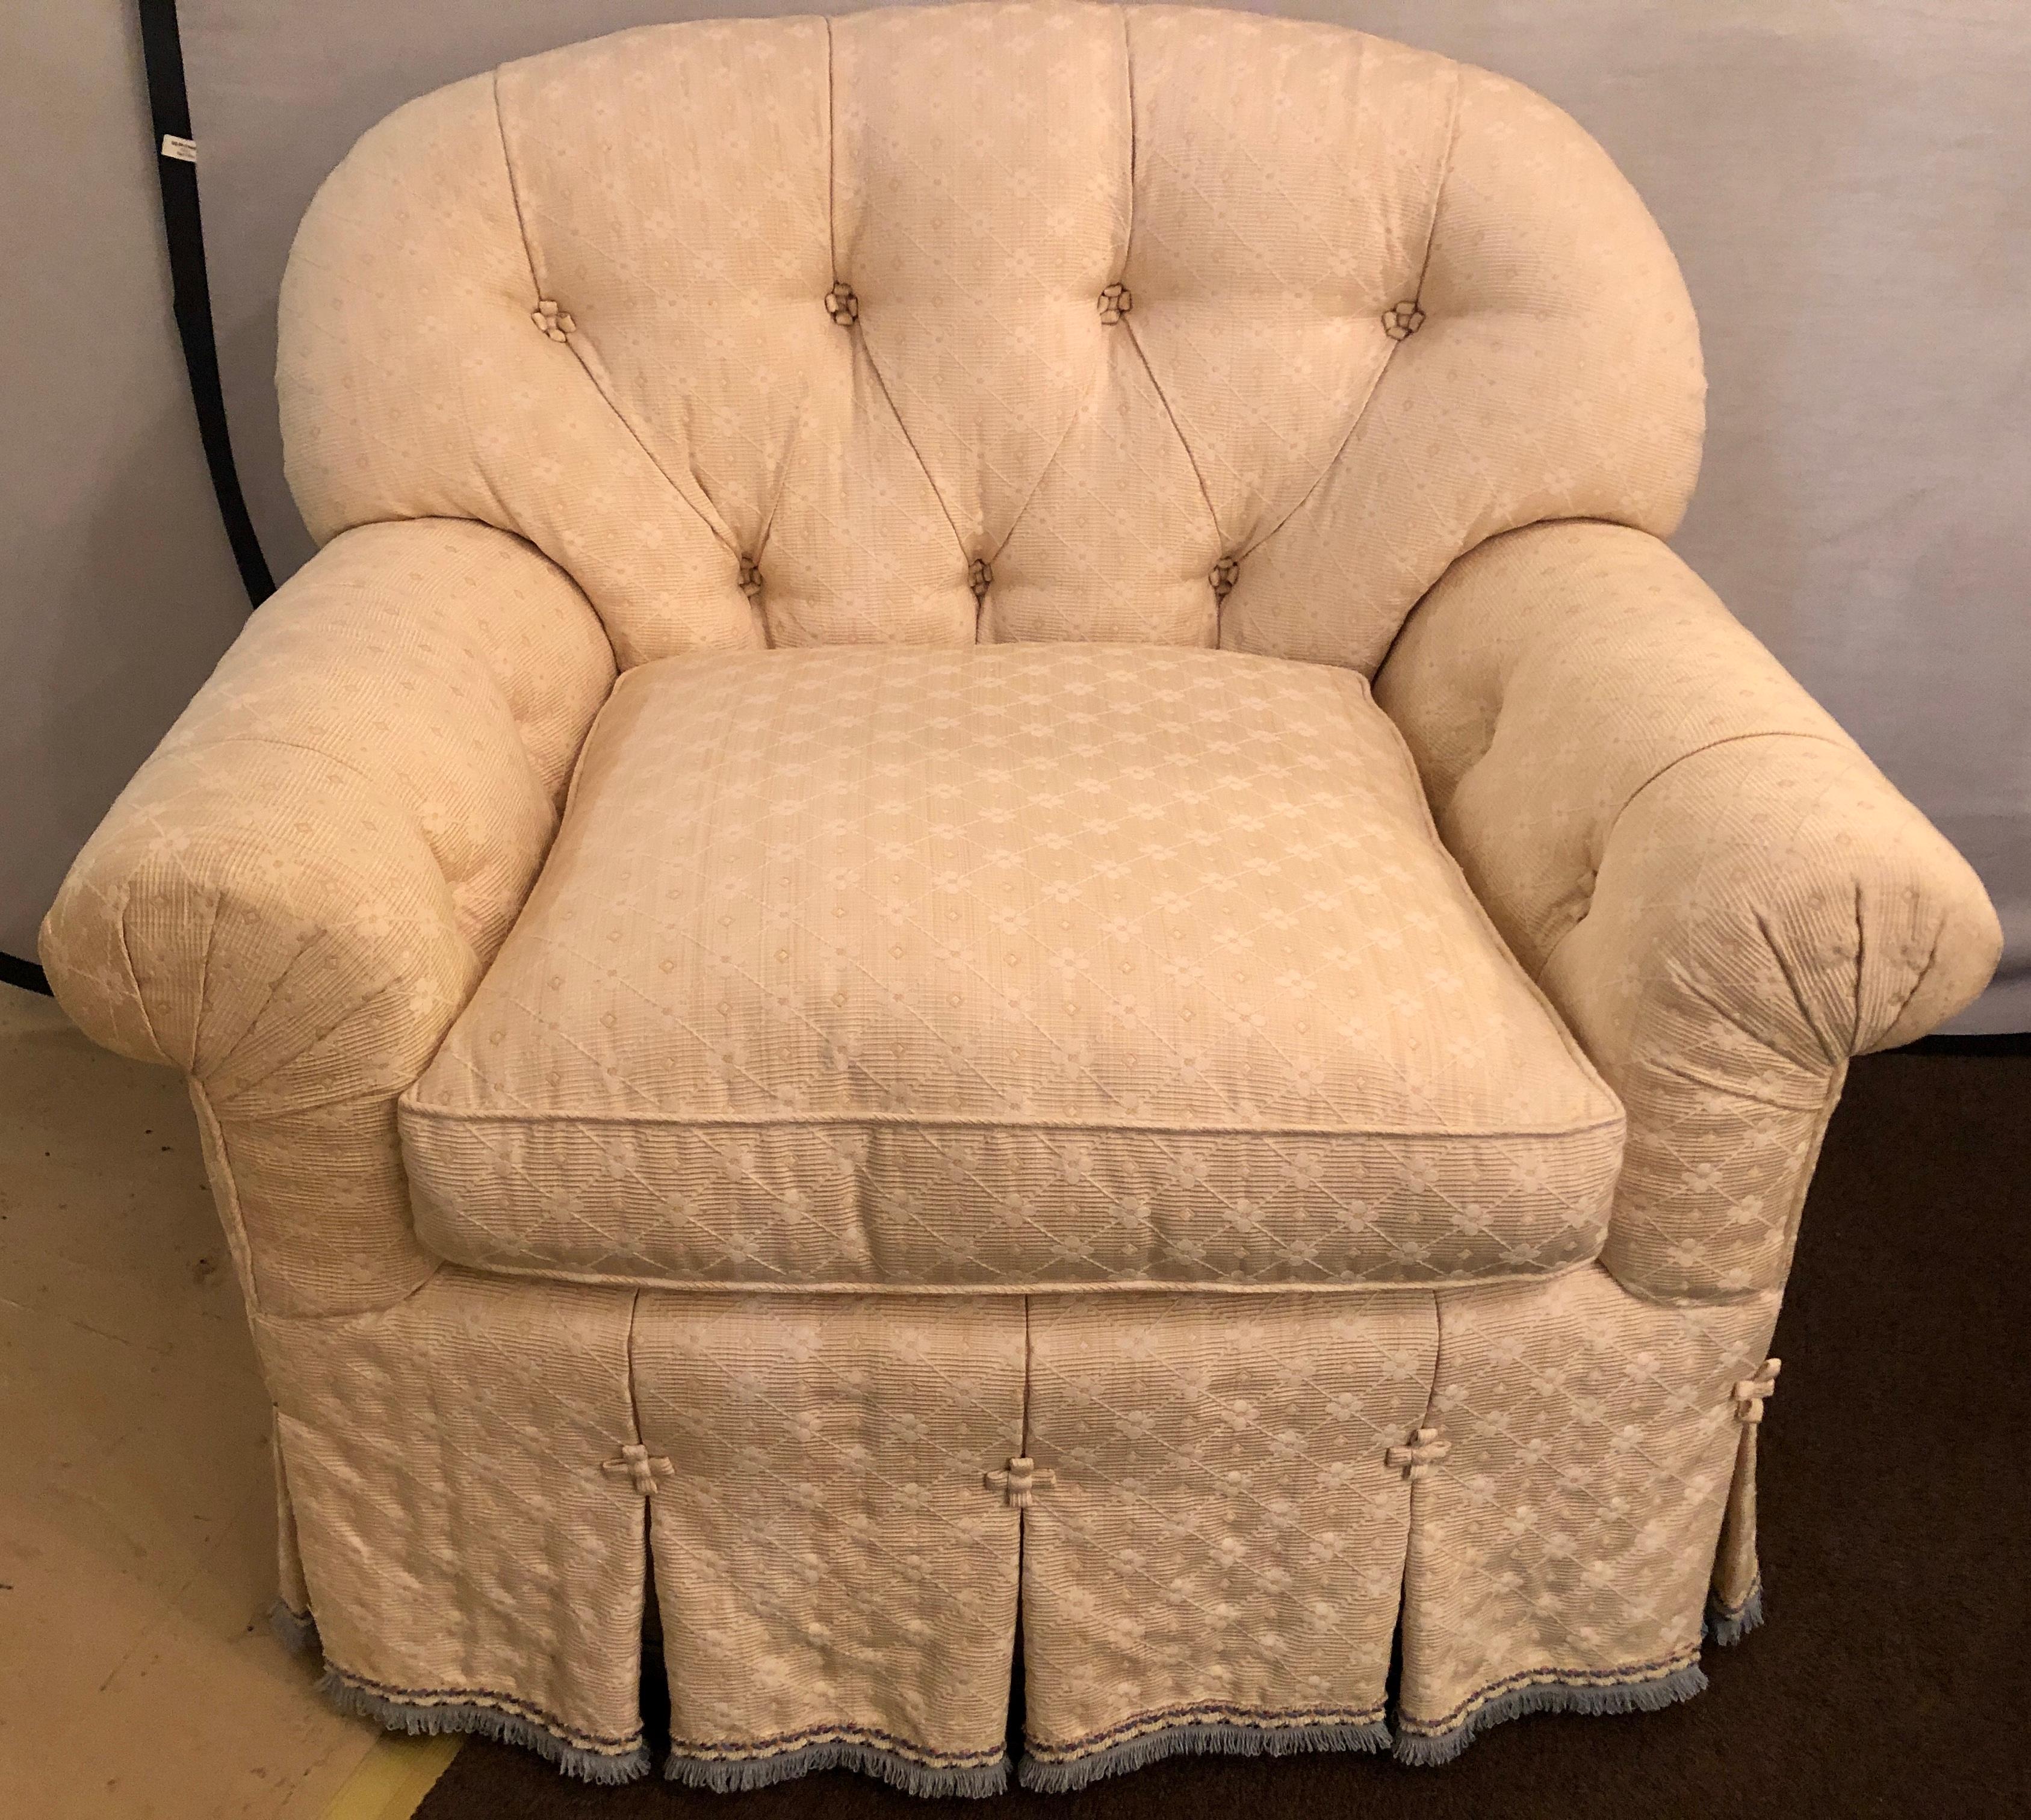 Hollywood Regency style abounds in this finest pair of lined and pleated spectacular overstuffed boudoir or lounge chairs each having a tufted back rest and tufted reverse. Too much to mention in these simply stunning custom quality, most likely o